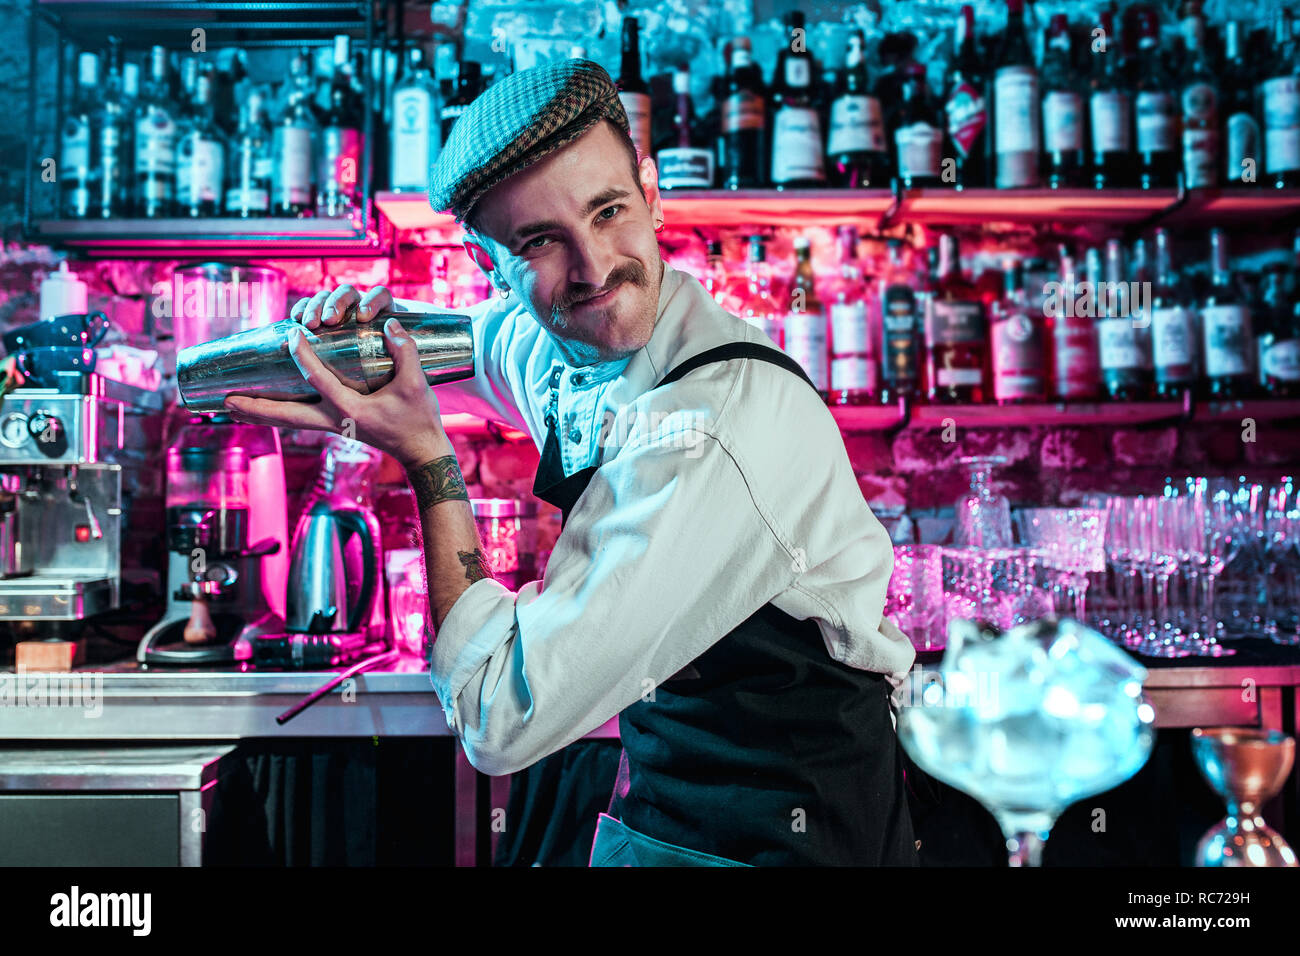 Expert barman is making cocktail at night club or bar. Glass of fiery cocktail on the bar counter against the background of bartenders hands with fire. Barman day concept Stock Photo